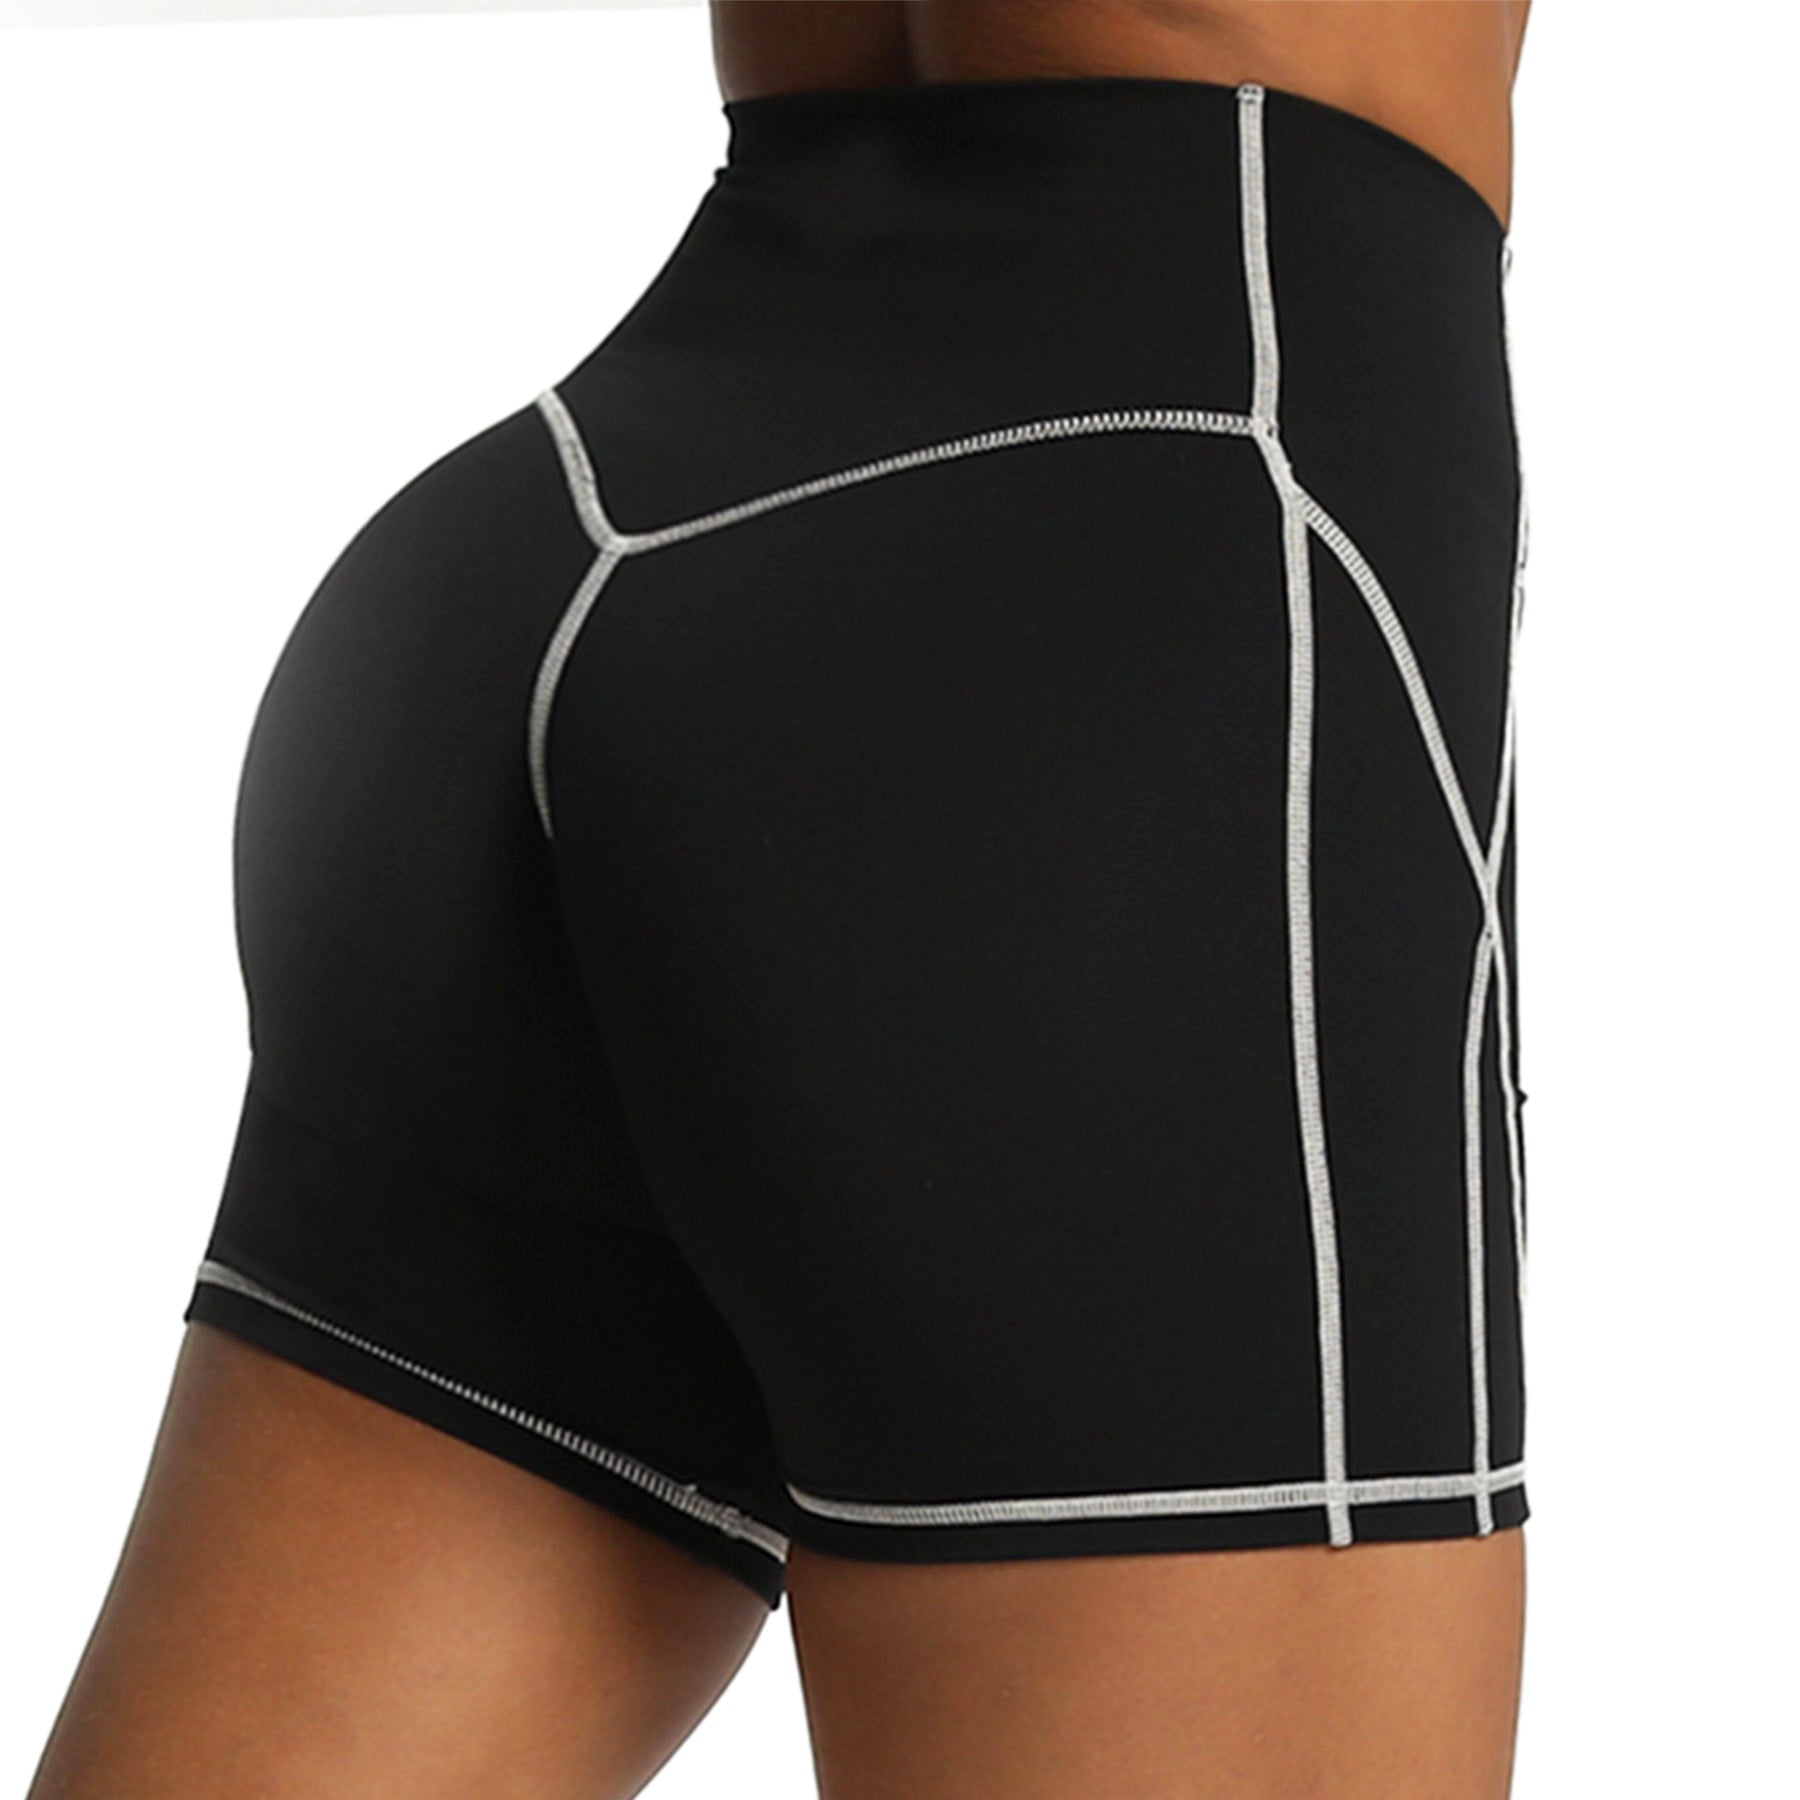 Aoxjox "Lexi Lined" Shorts